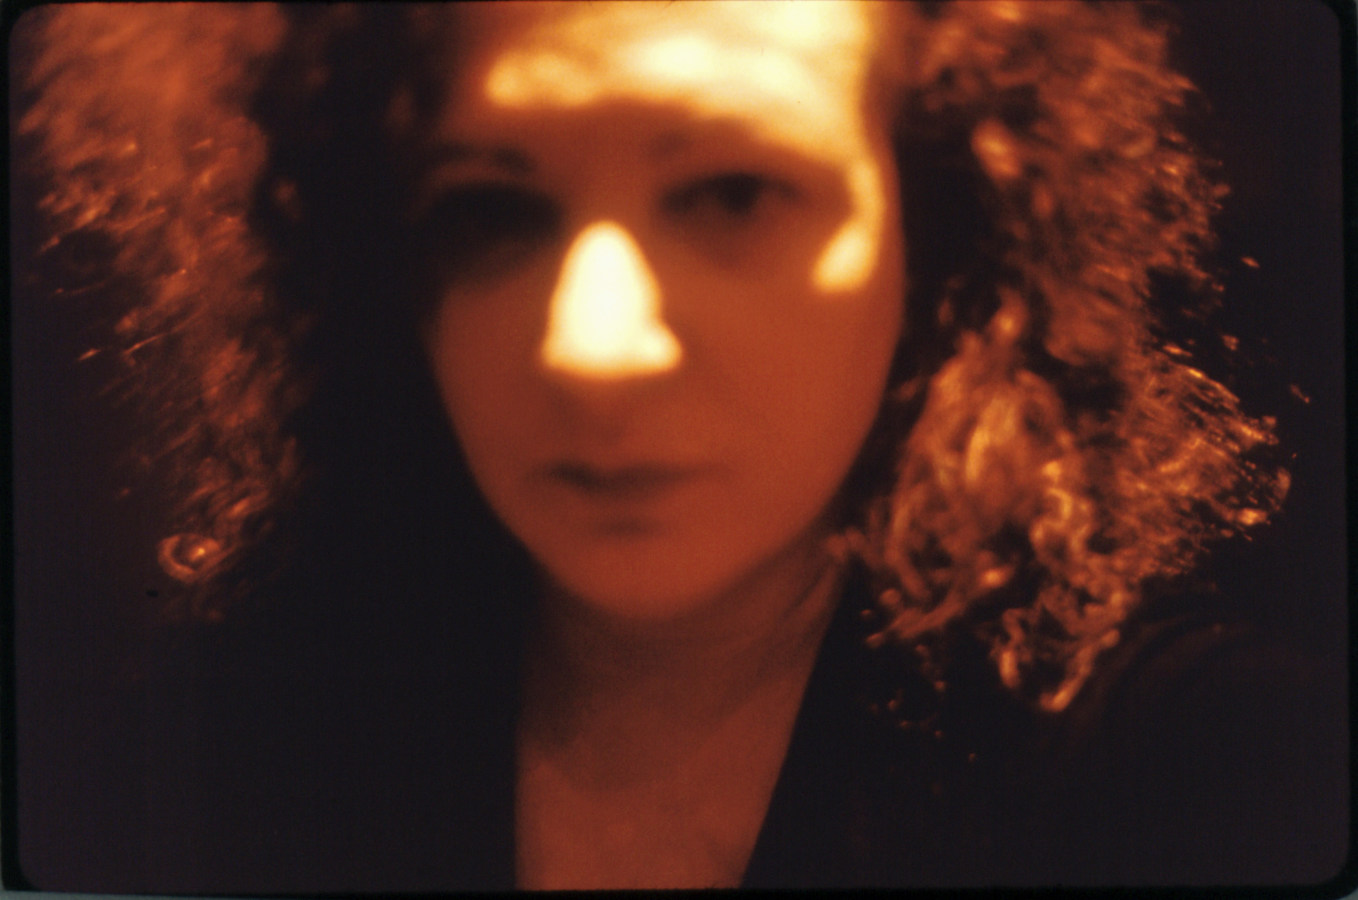 Color photograph of an out-of-focus woman's face framed by frizzy hair under orange light